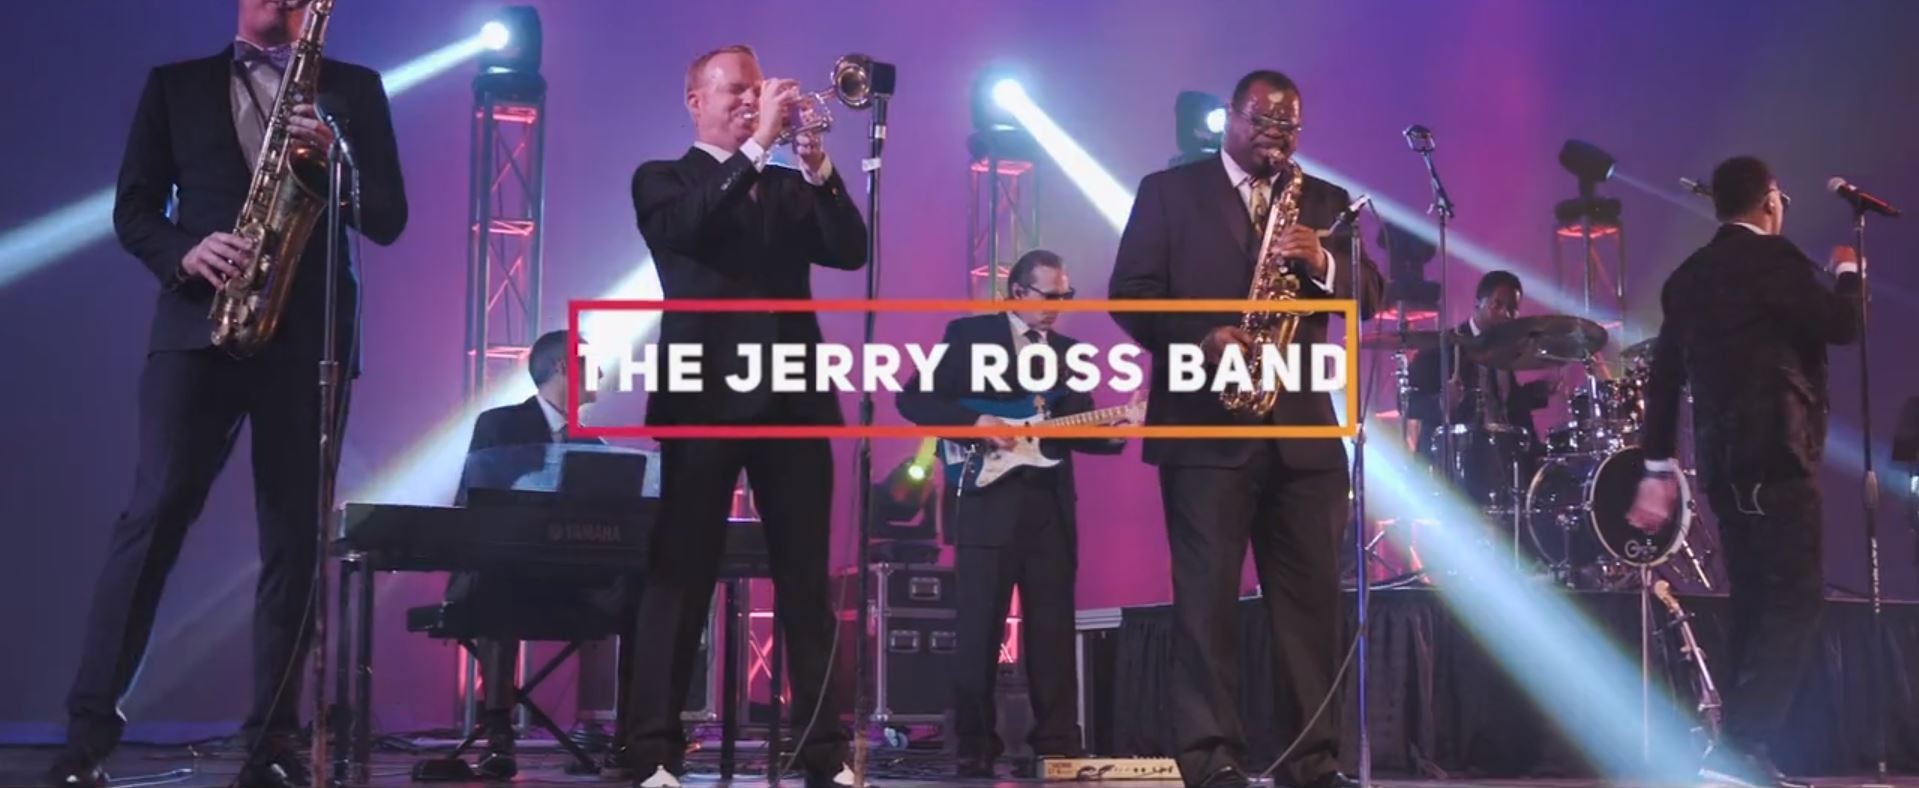 The Jerry Ross Band